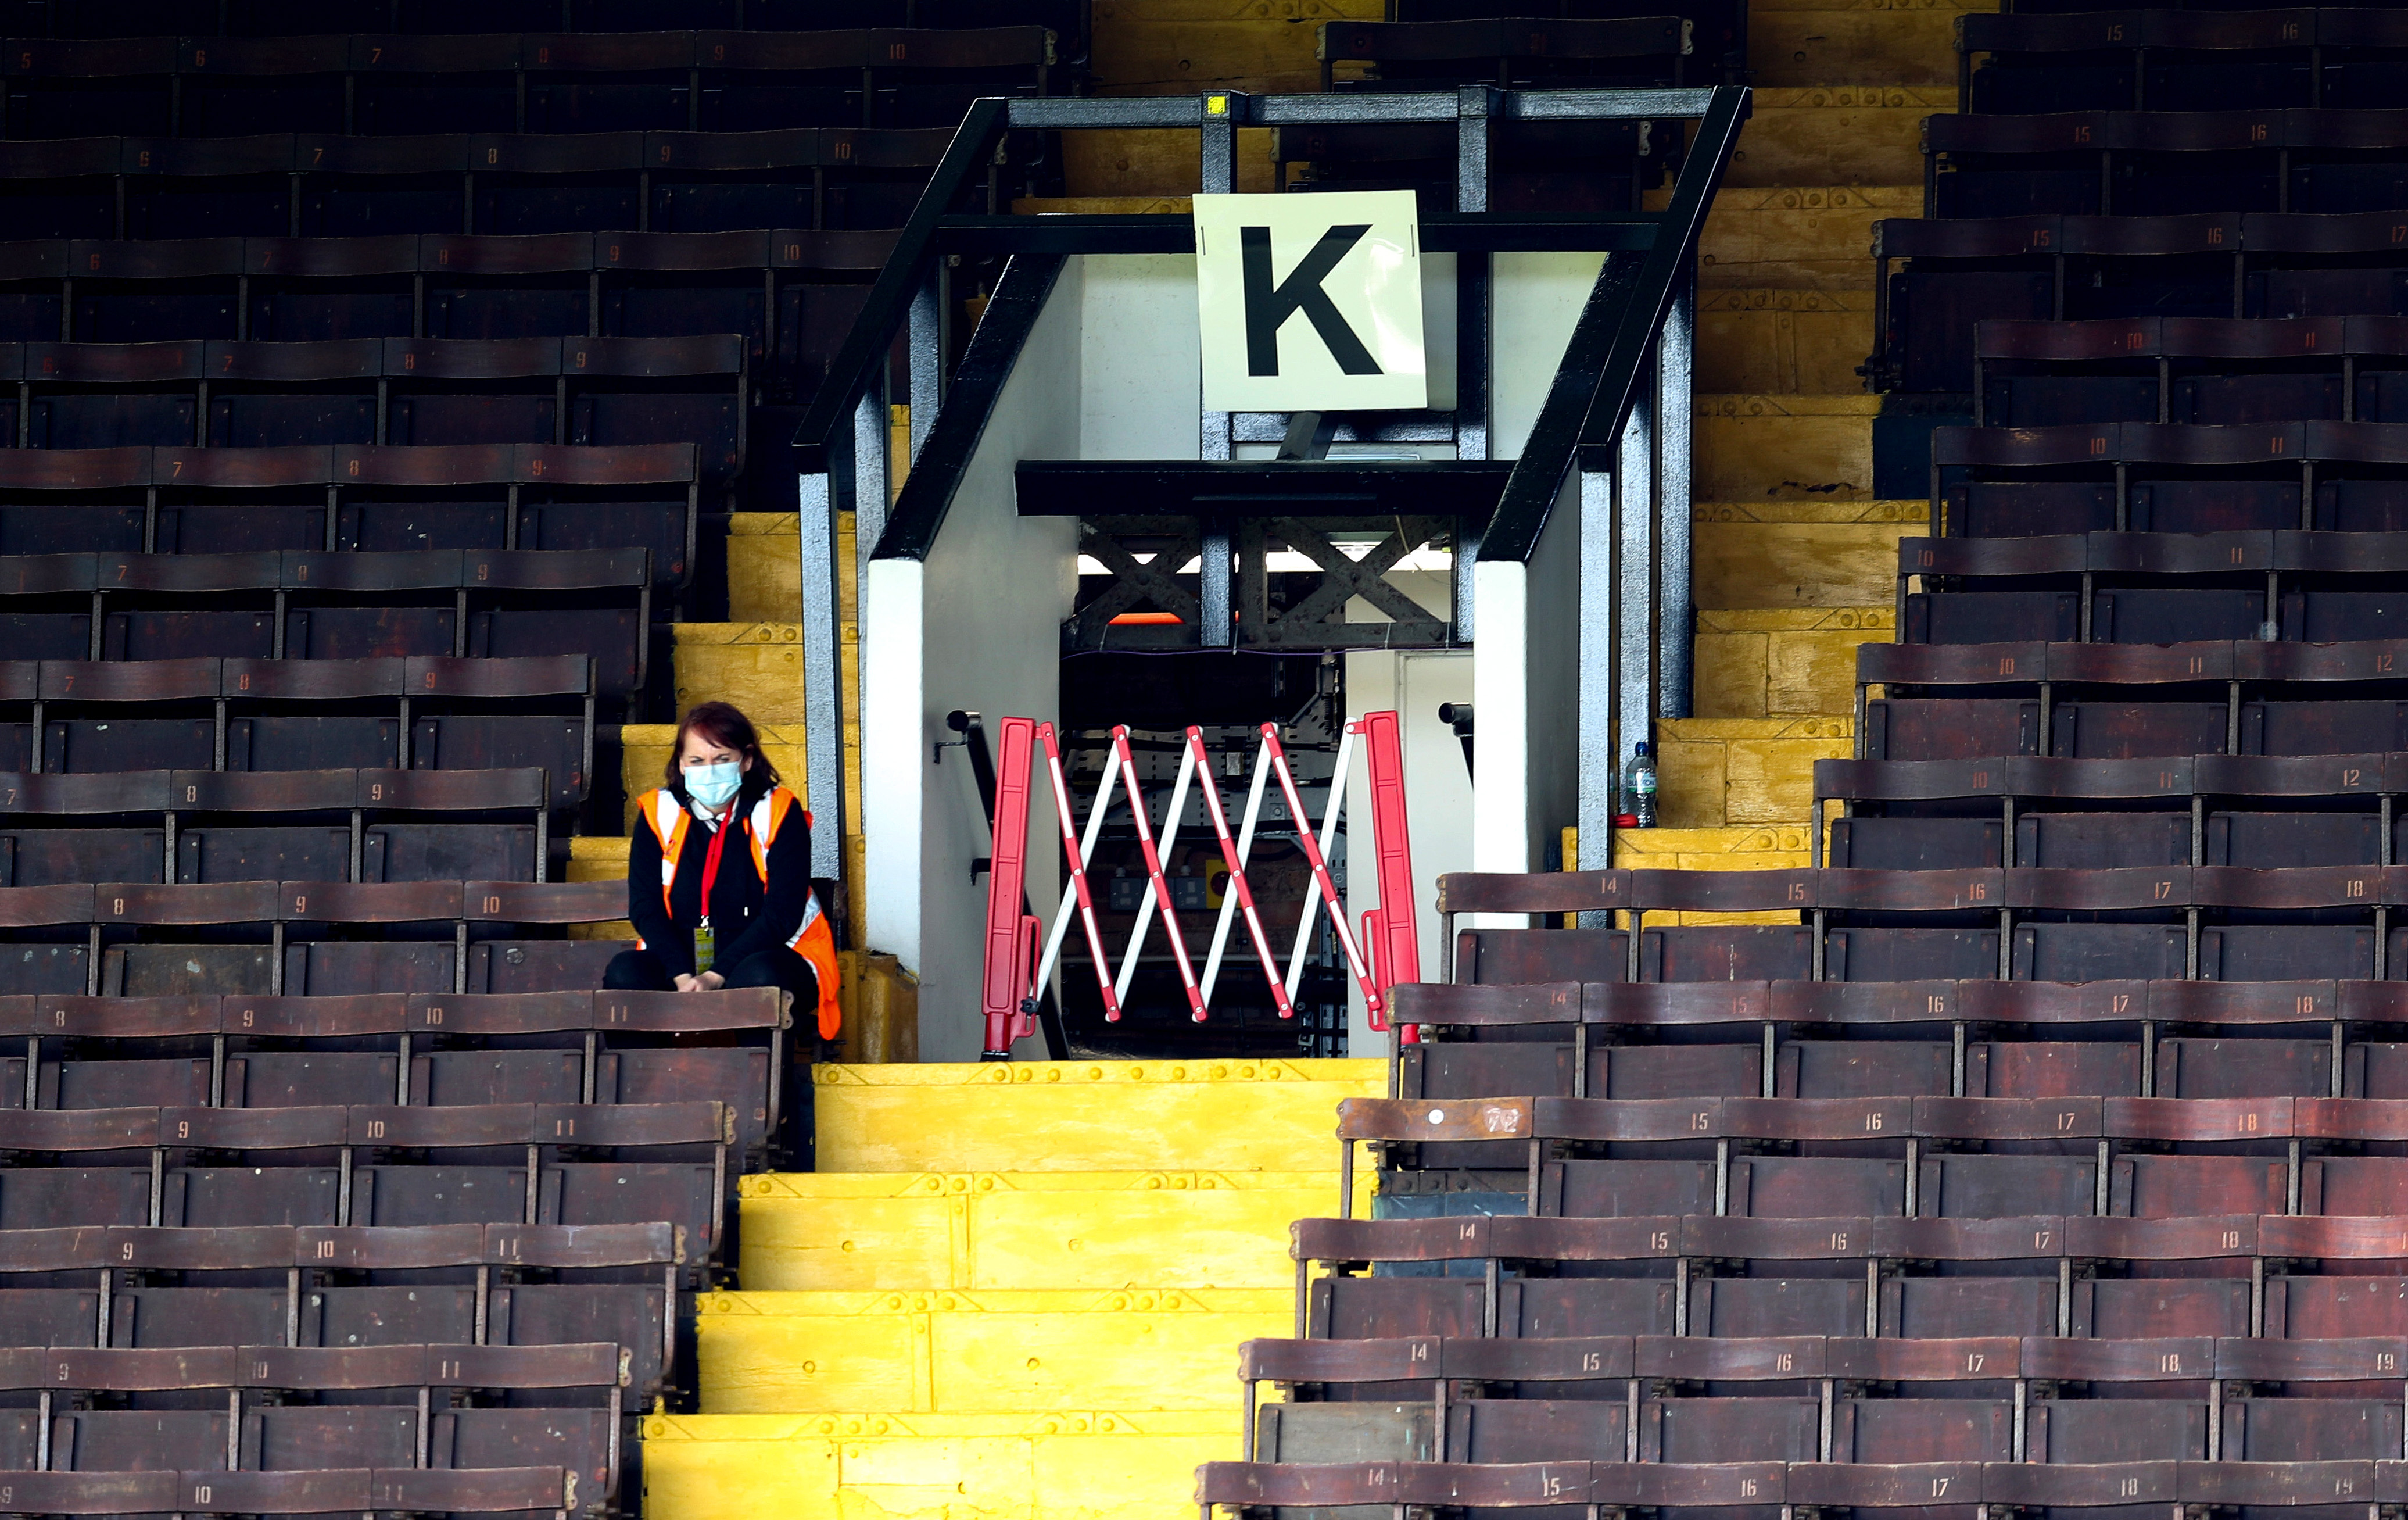 A steward wearing a protective face mask sits in the empty stand - Sky Bet Championship